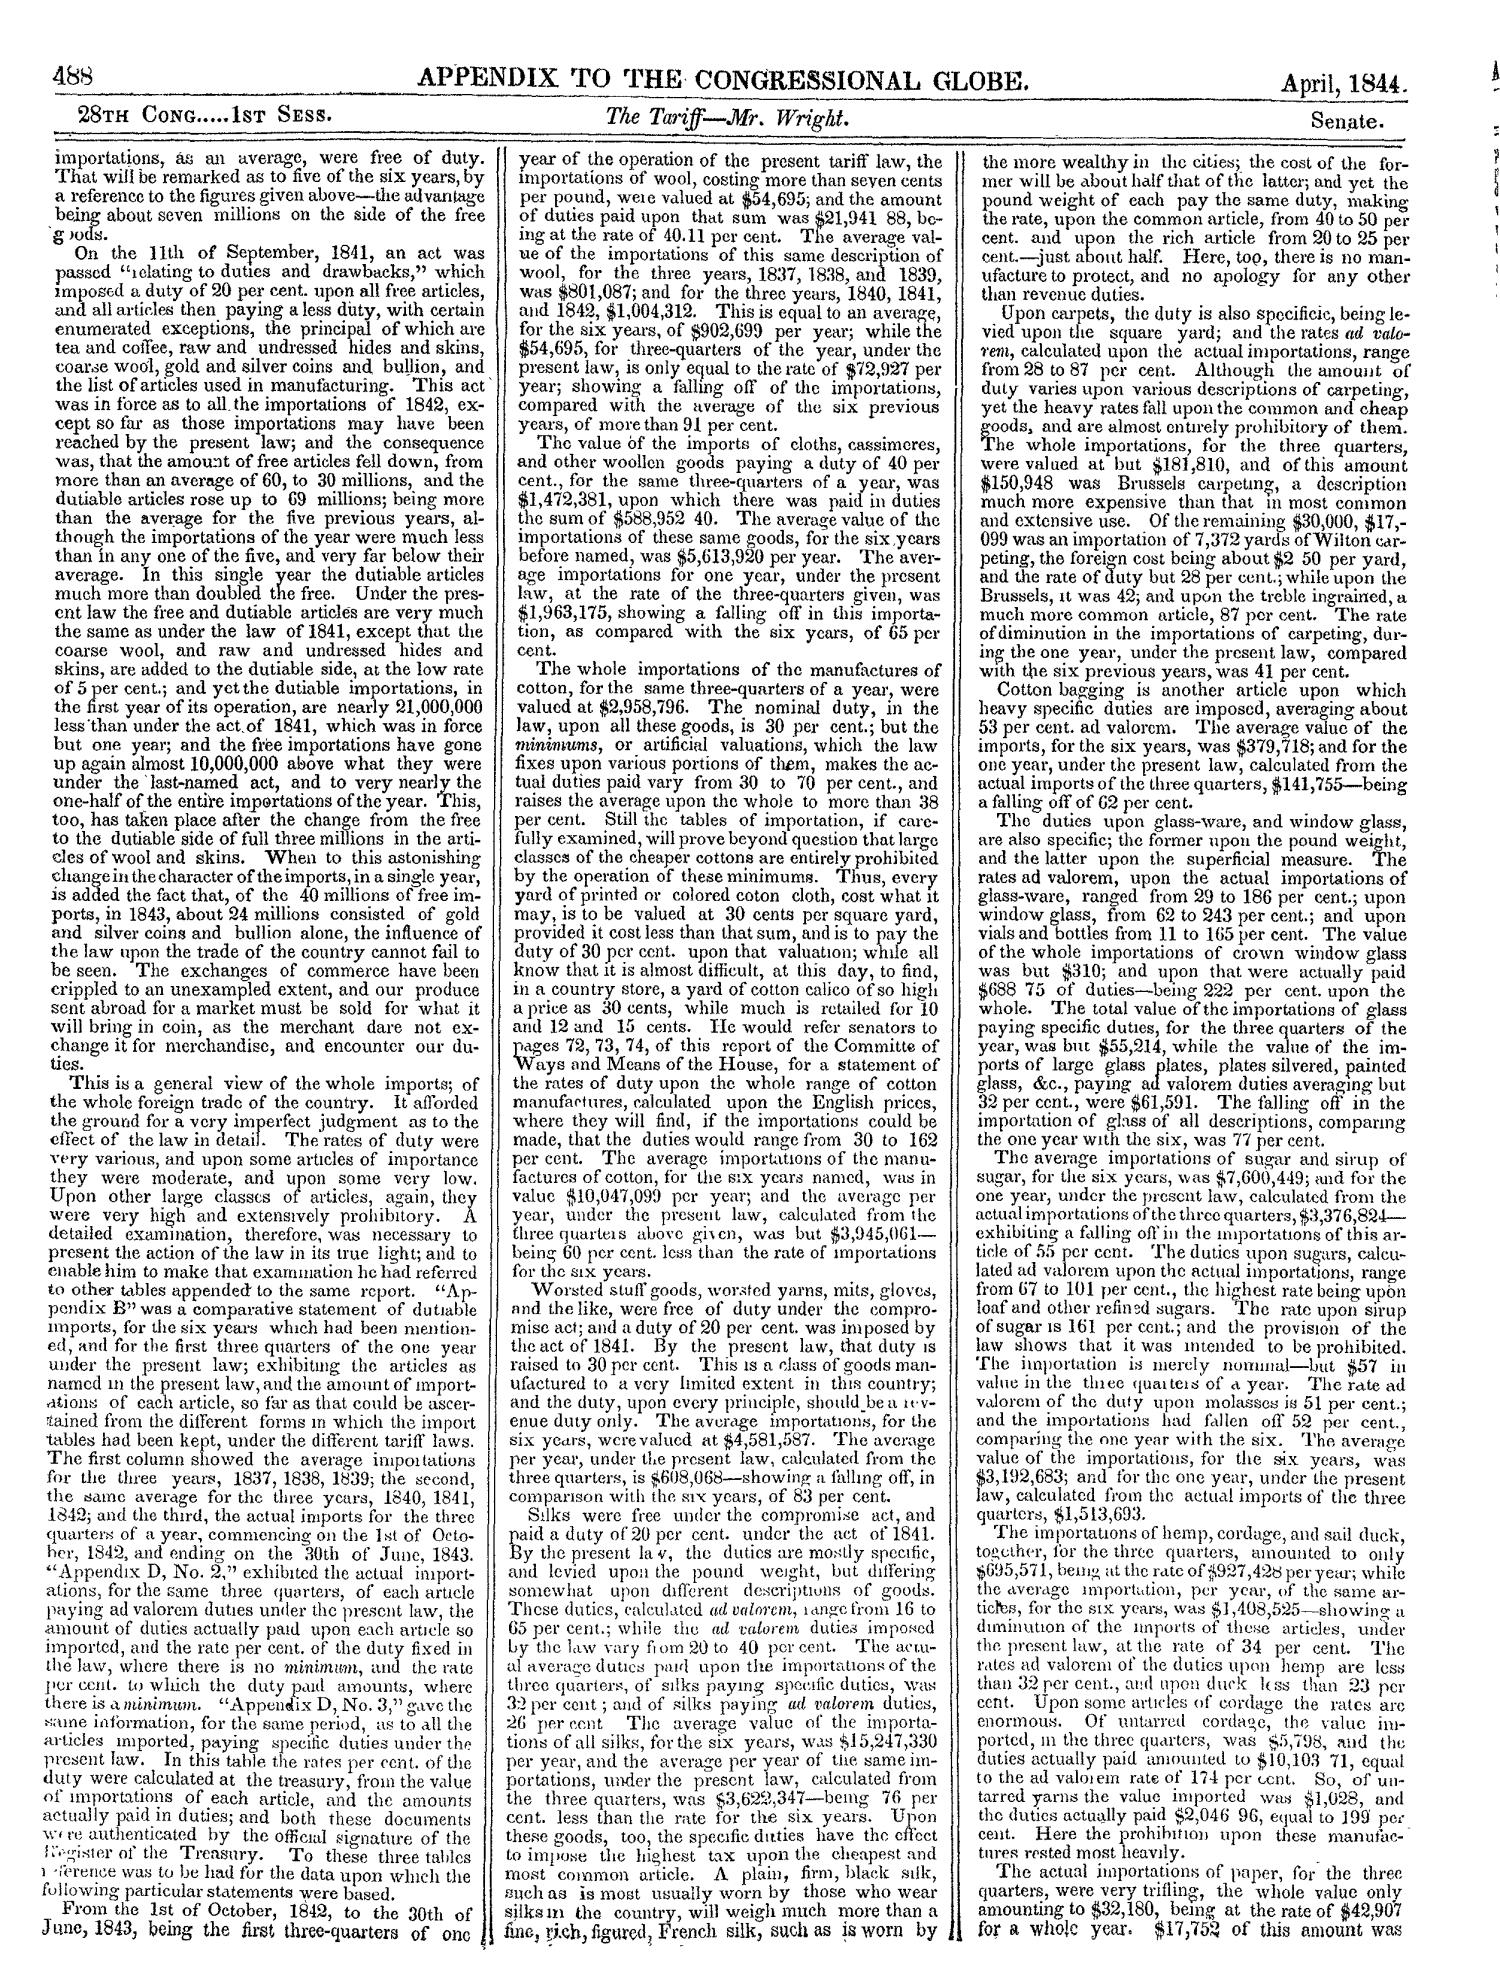 The Congressional Globe, Volume 13, Part 2: Twenty-Eighth Congress, First Session
                                                
                                                    488
                                                